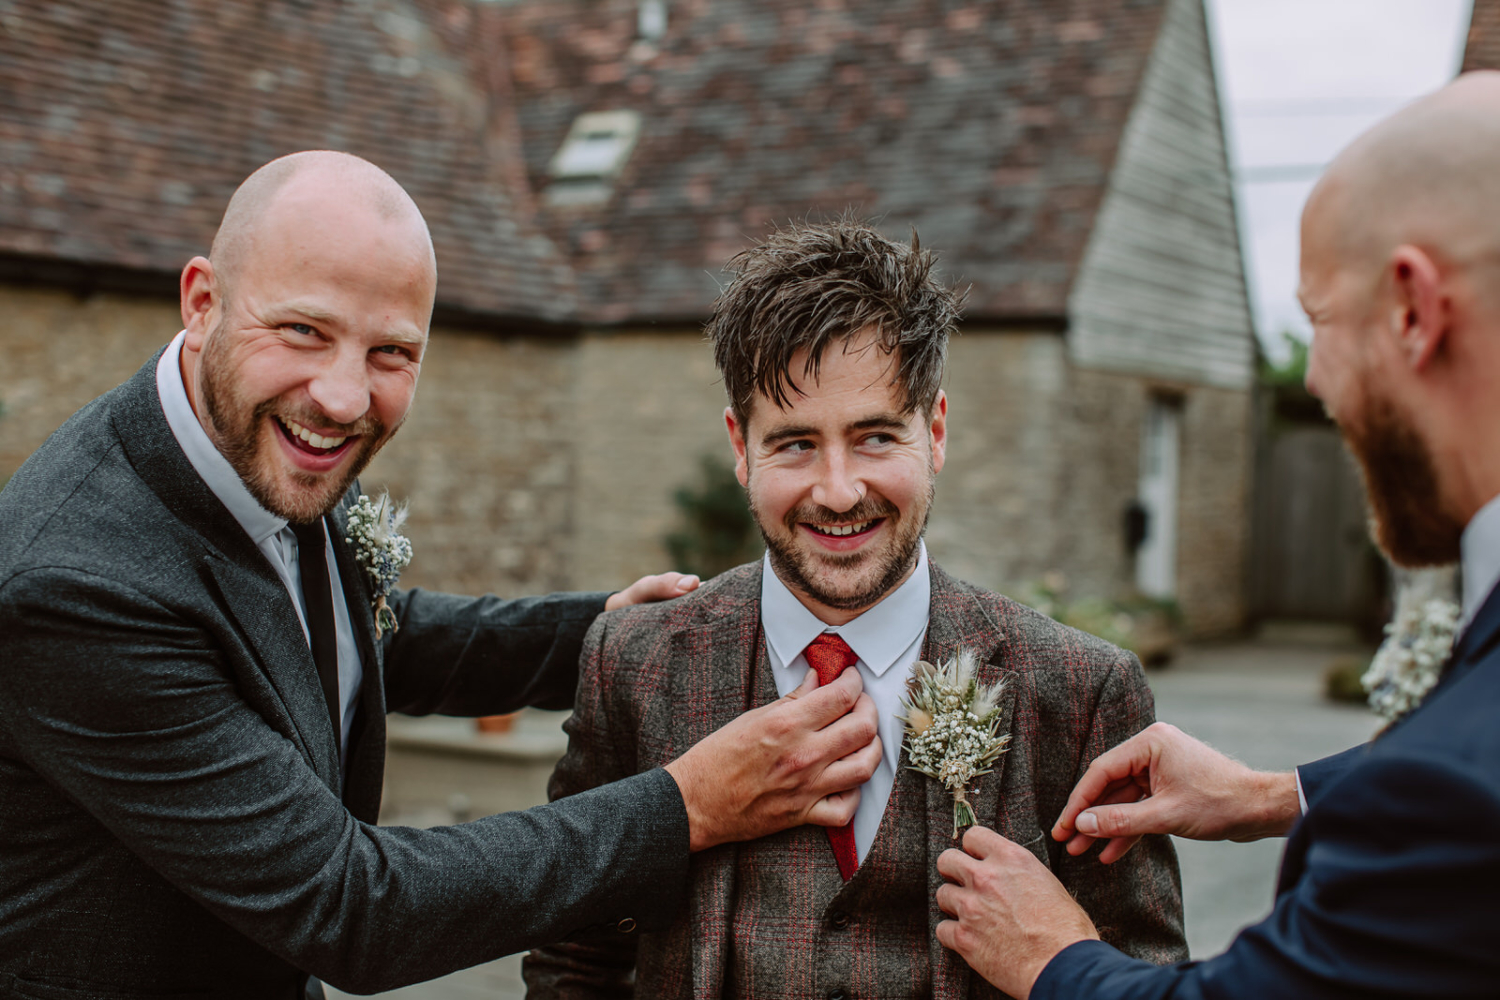 Fund photo of groomsman adjusting grooms tie and buttonhole while laughing.